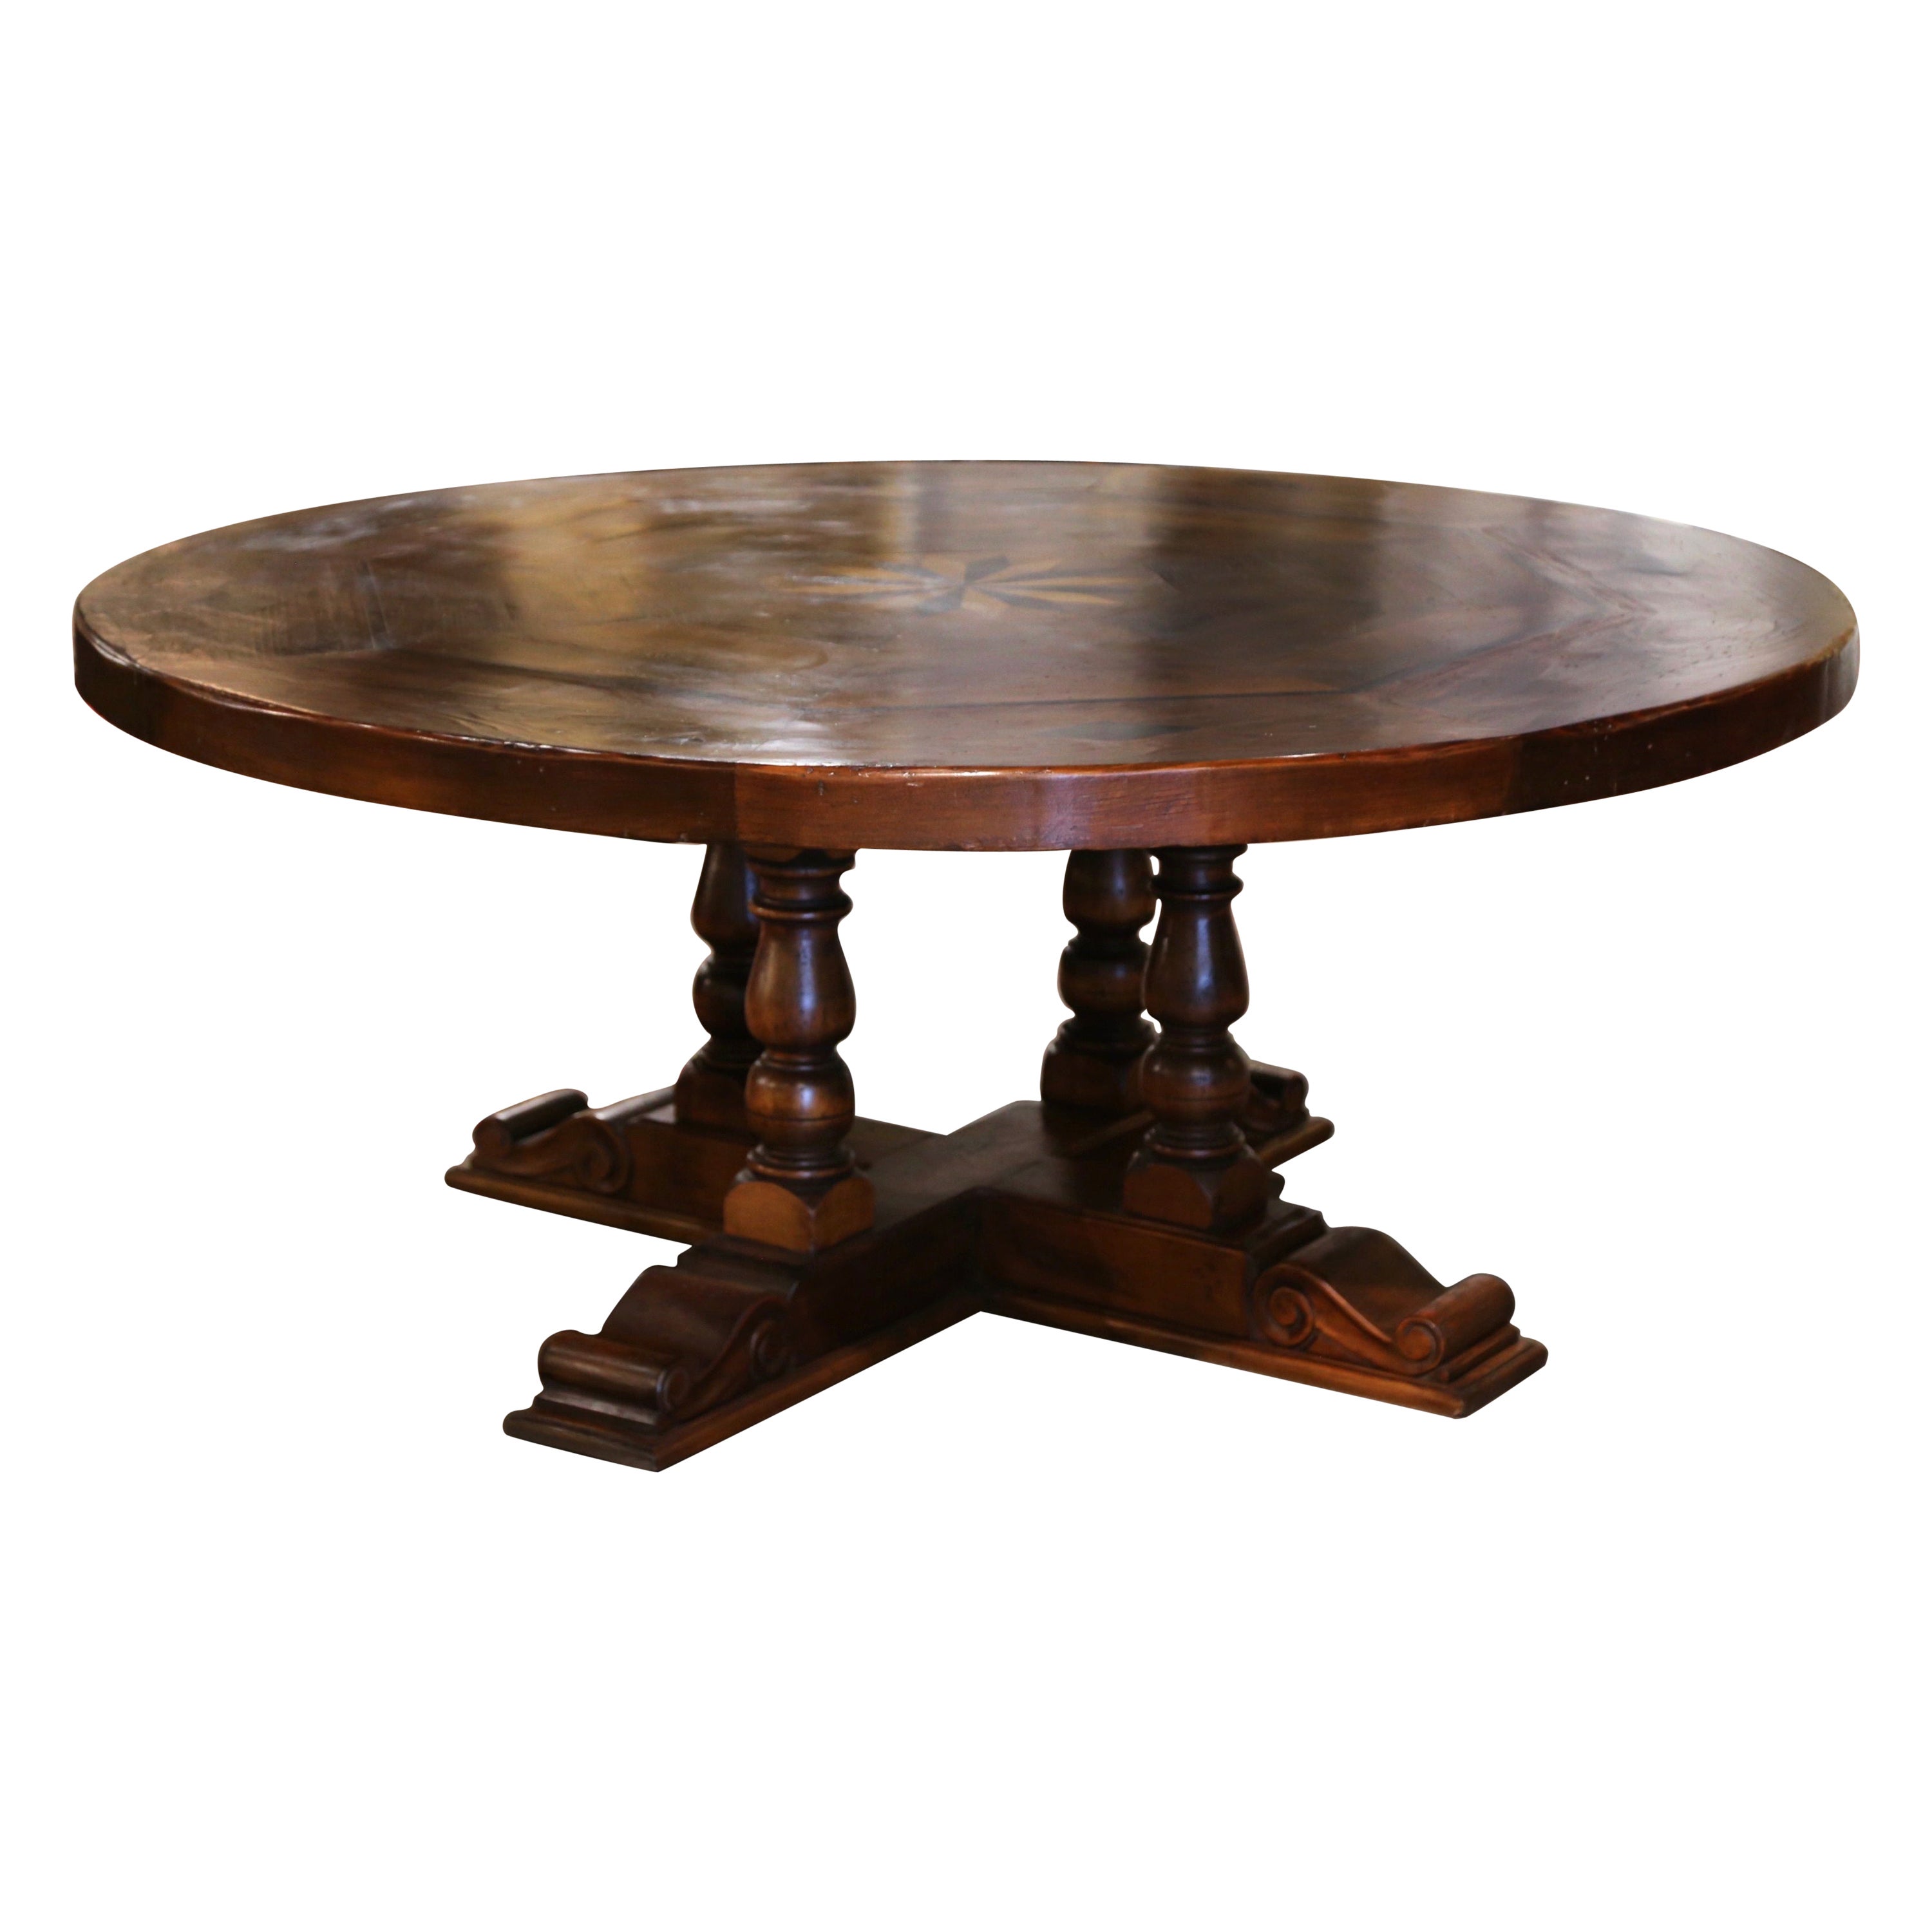 French Carved Marquetry Decor Walnut and Pine Pedestal Round Dining Table